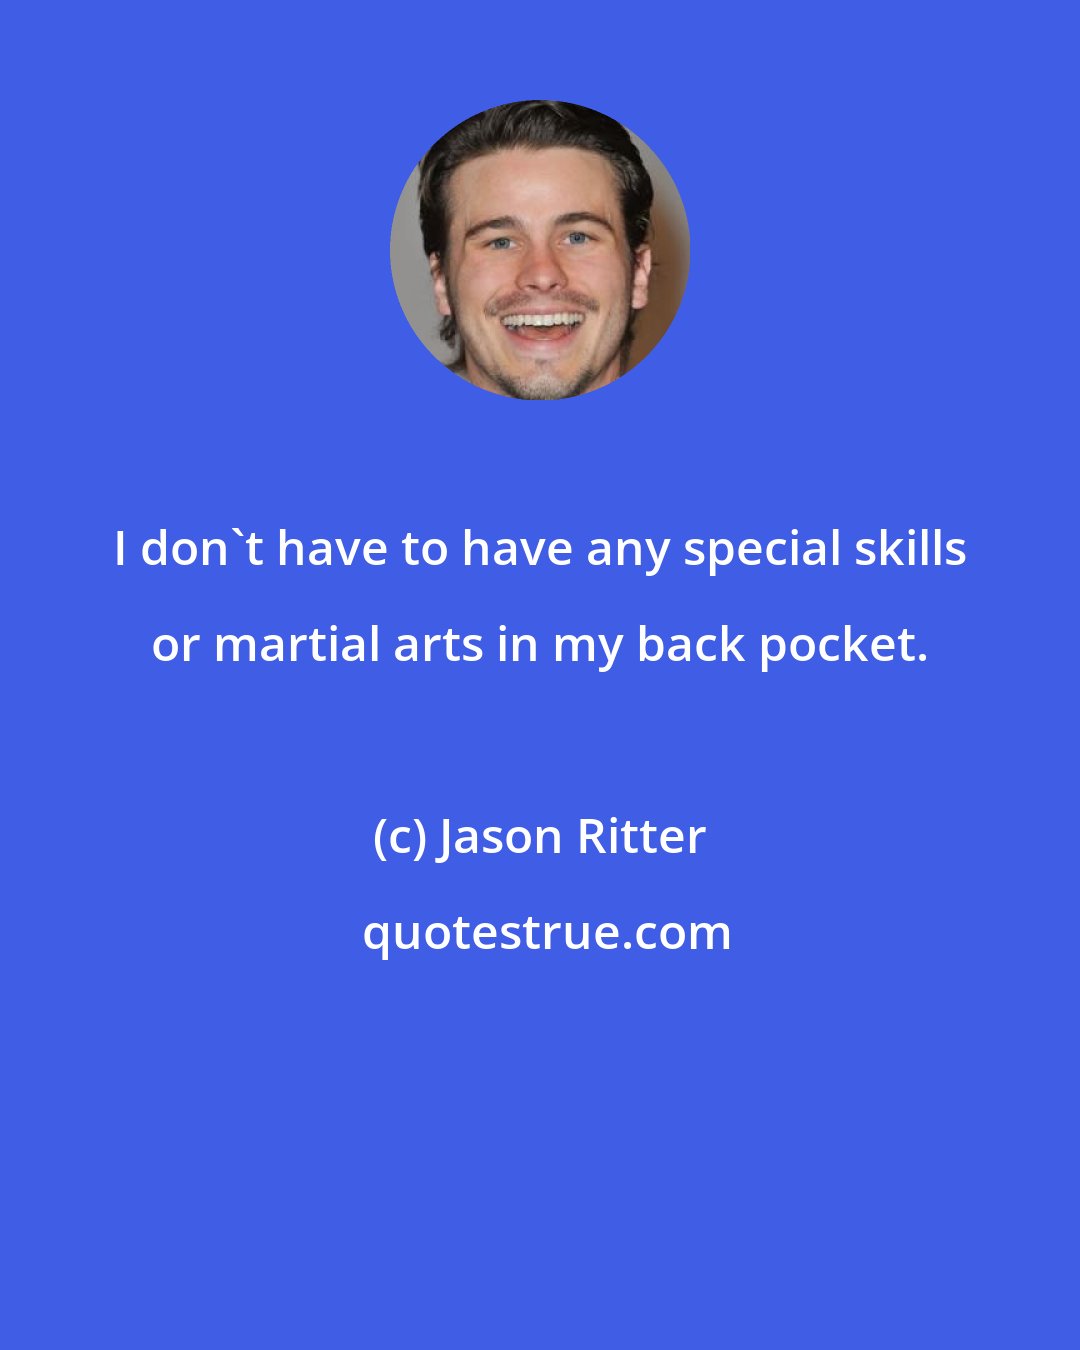 Jason Ritter: I don't have to have any special skills or martial arts in my back pocket.